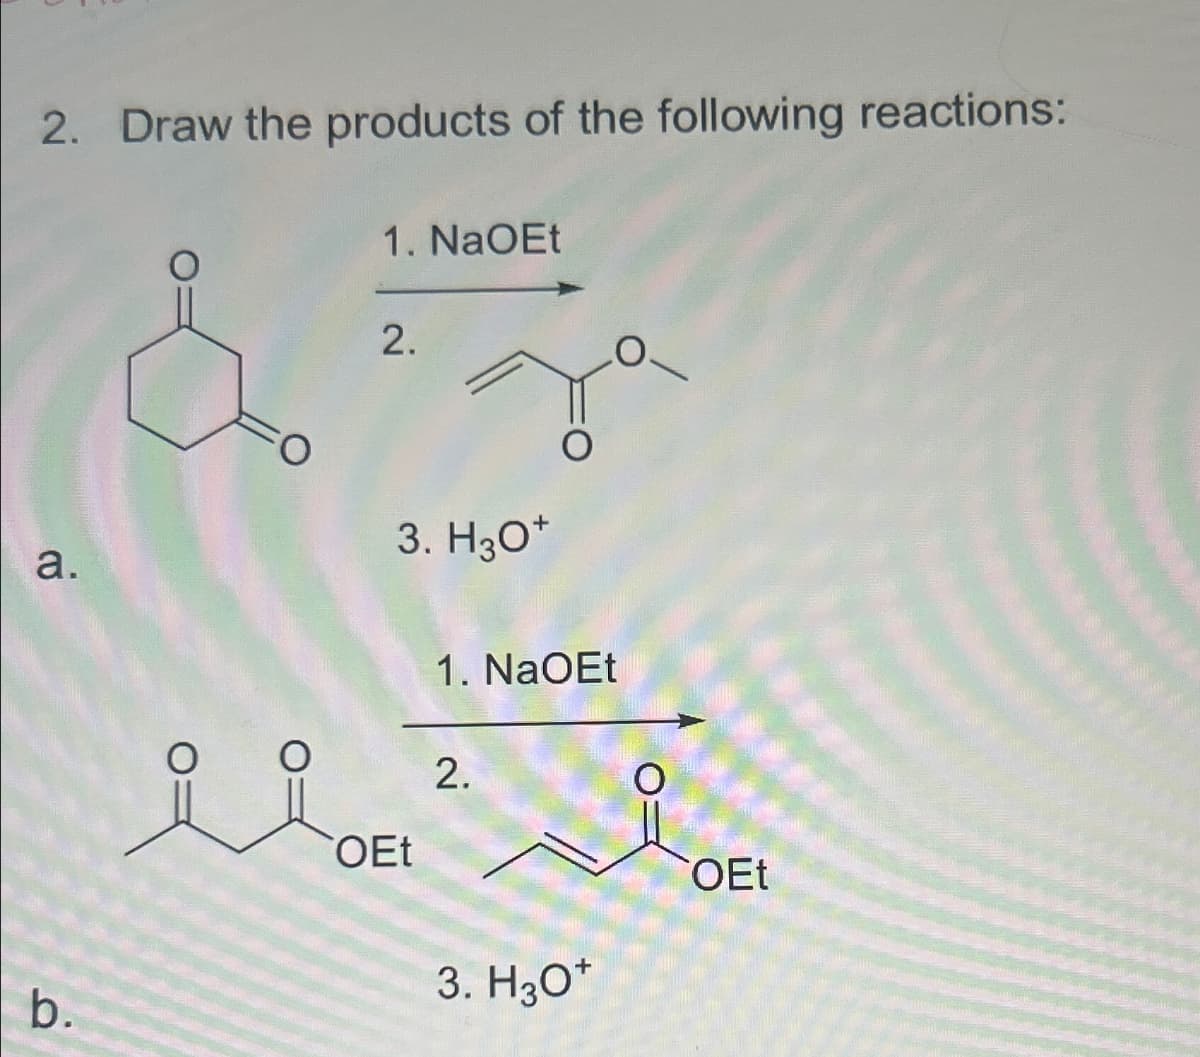 2. Draw the products of the following reactions:
1. NaOEt
2.
a.
b.
3. H3O+
ii DEL
OEt
1. NaOEt
2.
3. H3O+
OEt